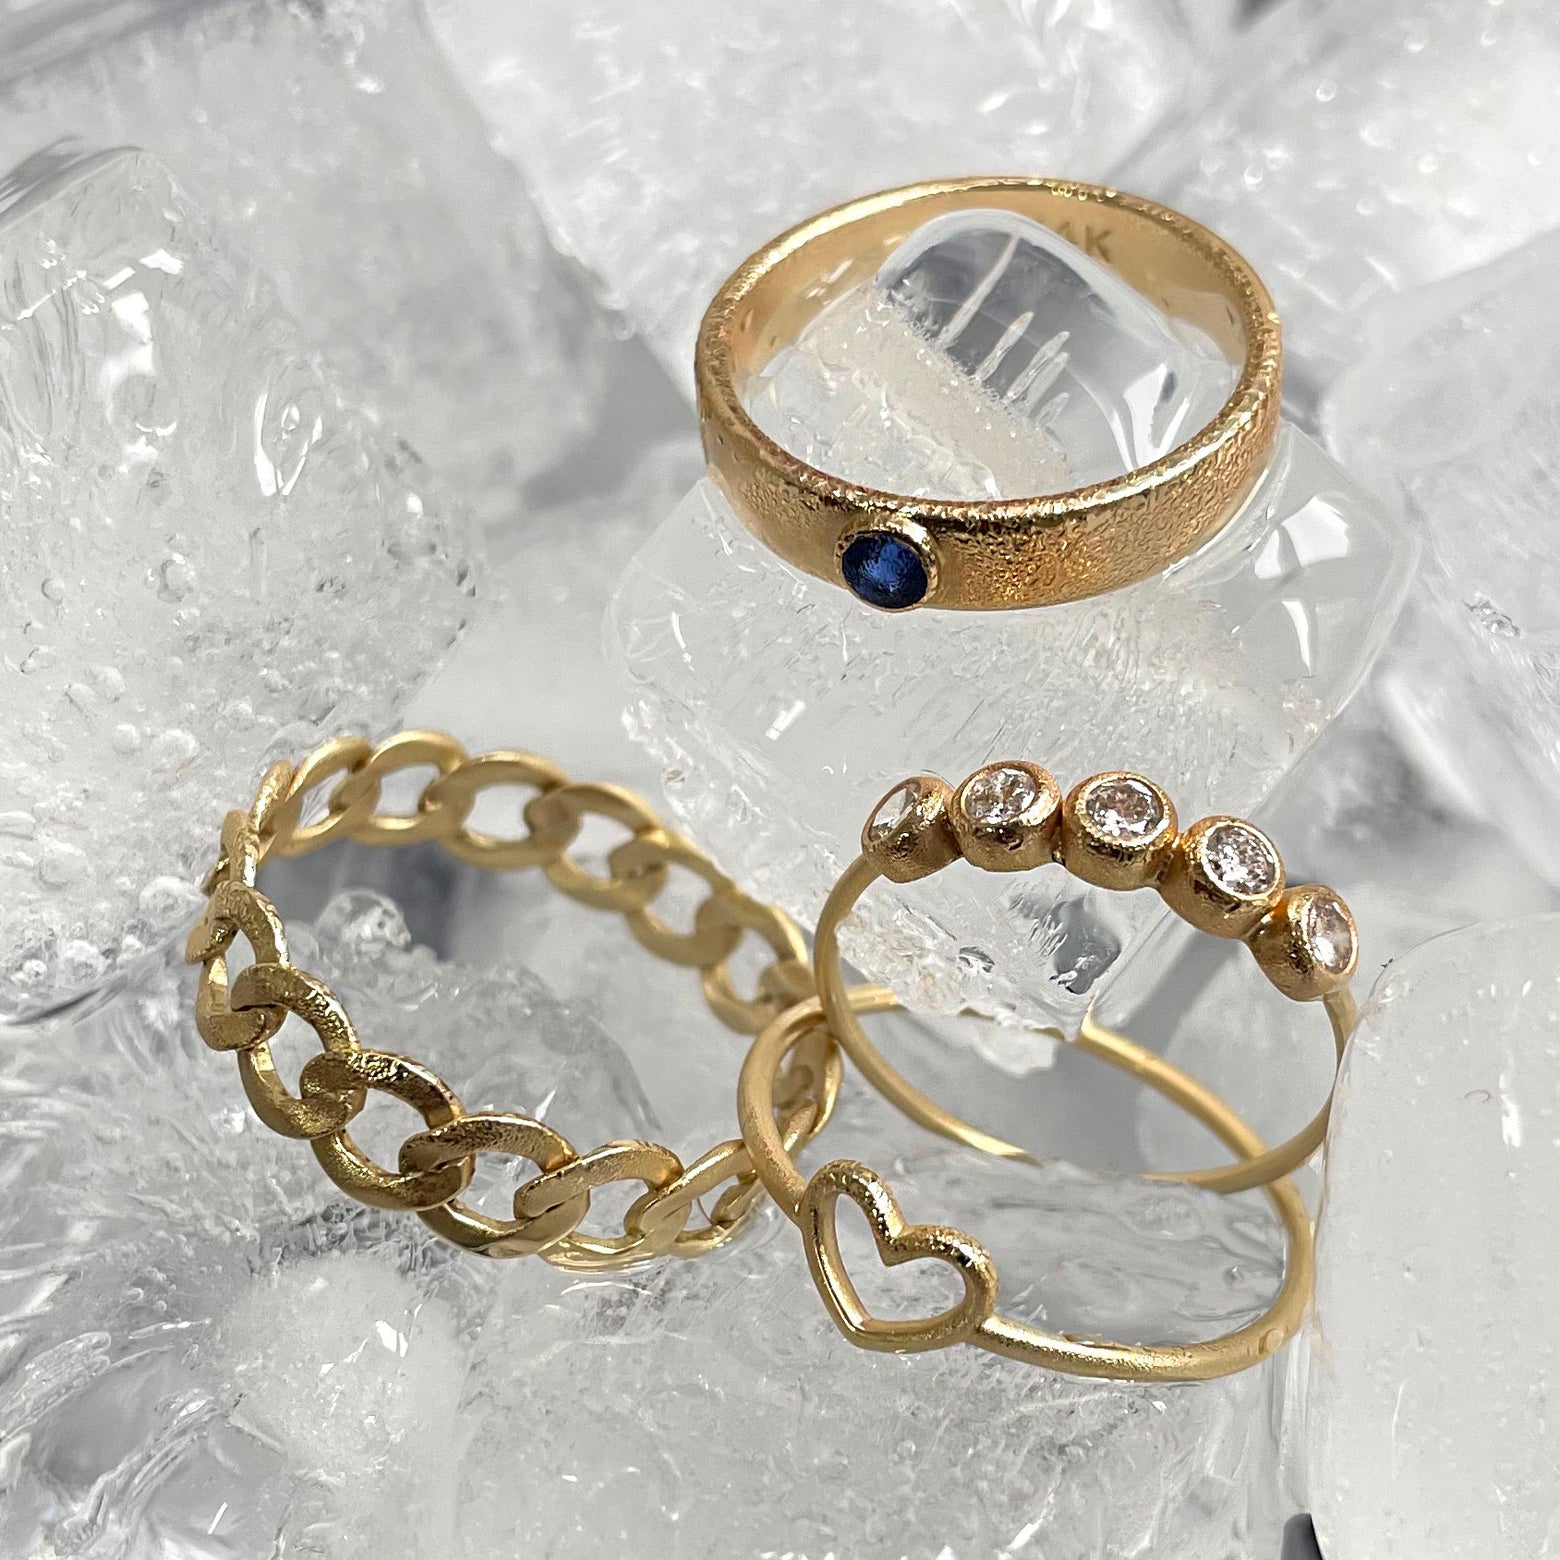 A 5 diamond ring, a sapphire industrial ring, a heart ring, and a curb ring sitting on ice cubes